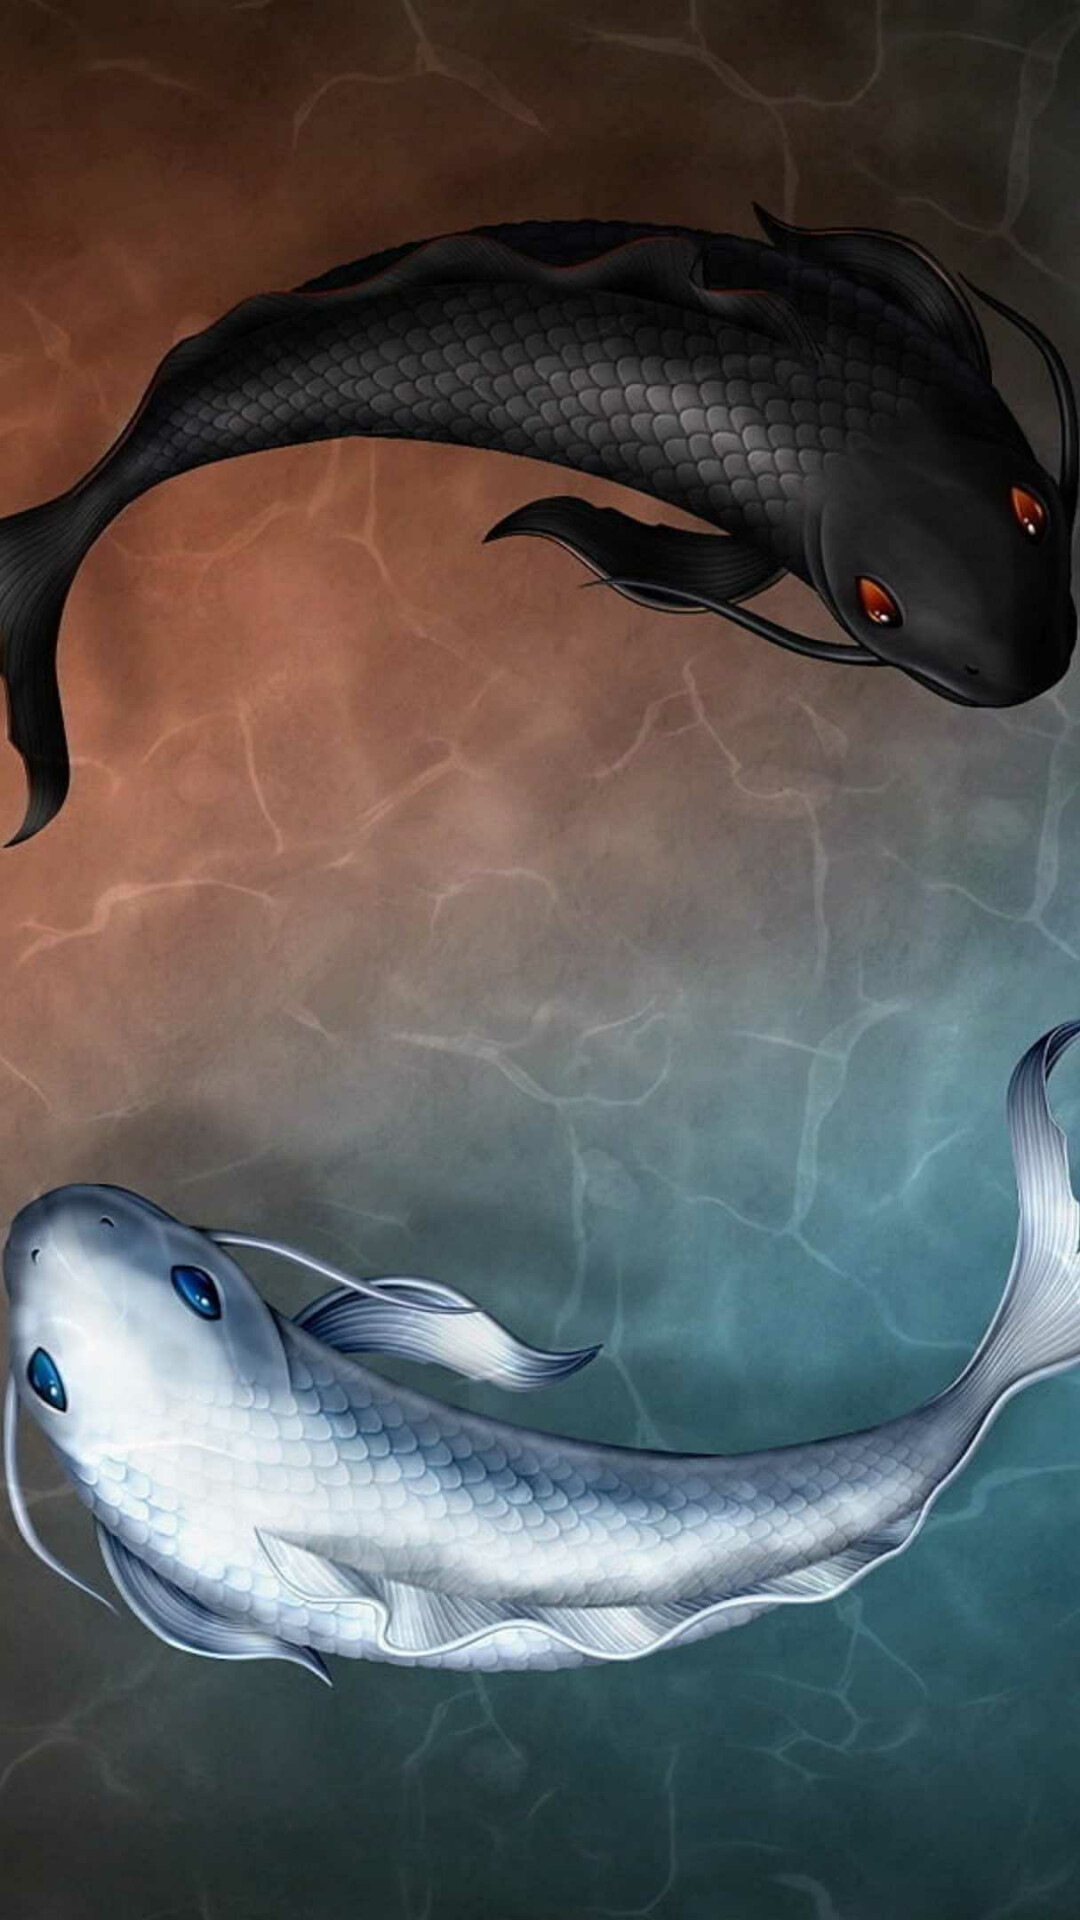 Fish: Aquatic vertebrates, Have gills, paired fins, a long body covered with scales, Koi. 1080x1920 Full HD Background.